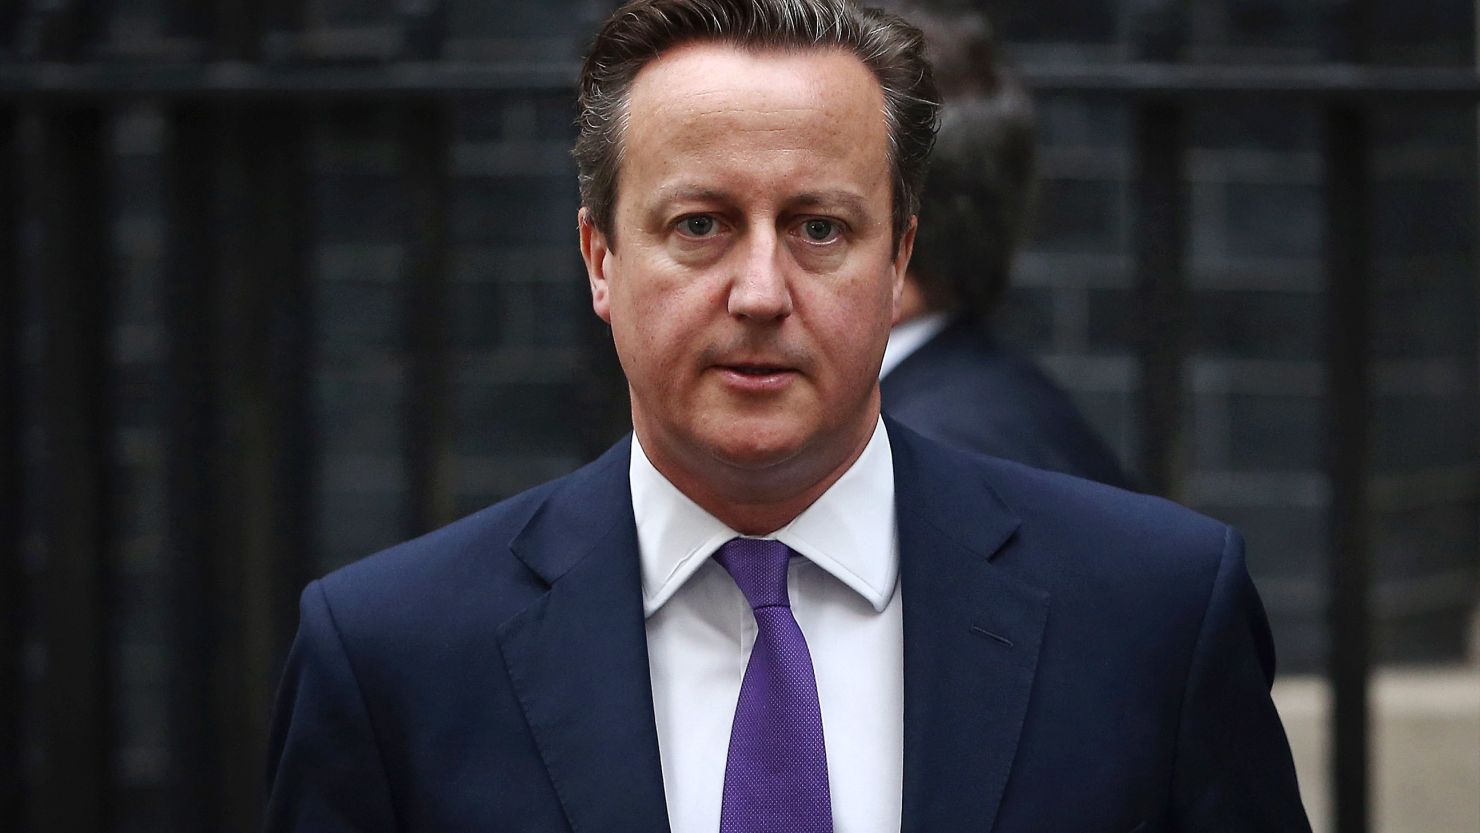 British Prime Minister David Cameron got a hoax call from someone claiming to be a spy chief.